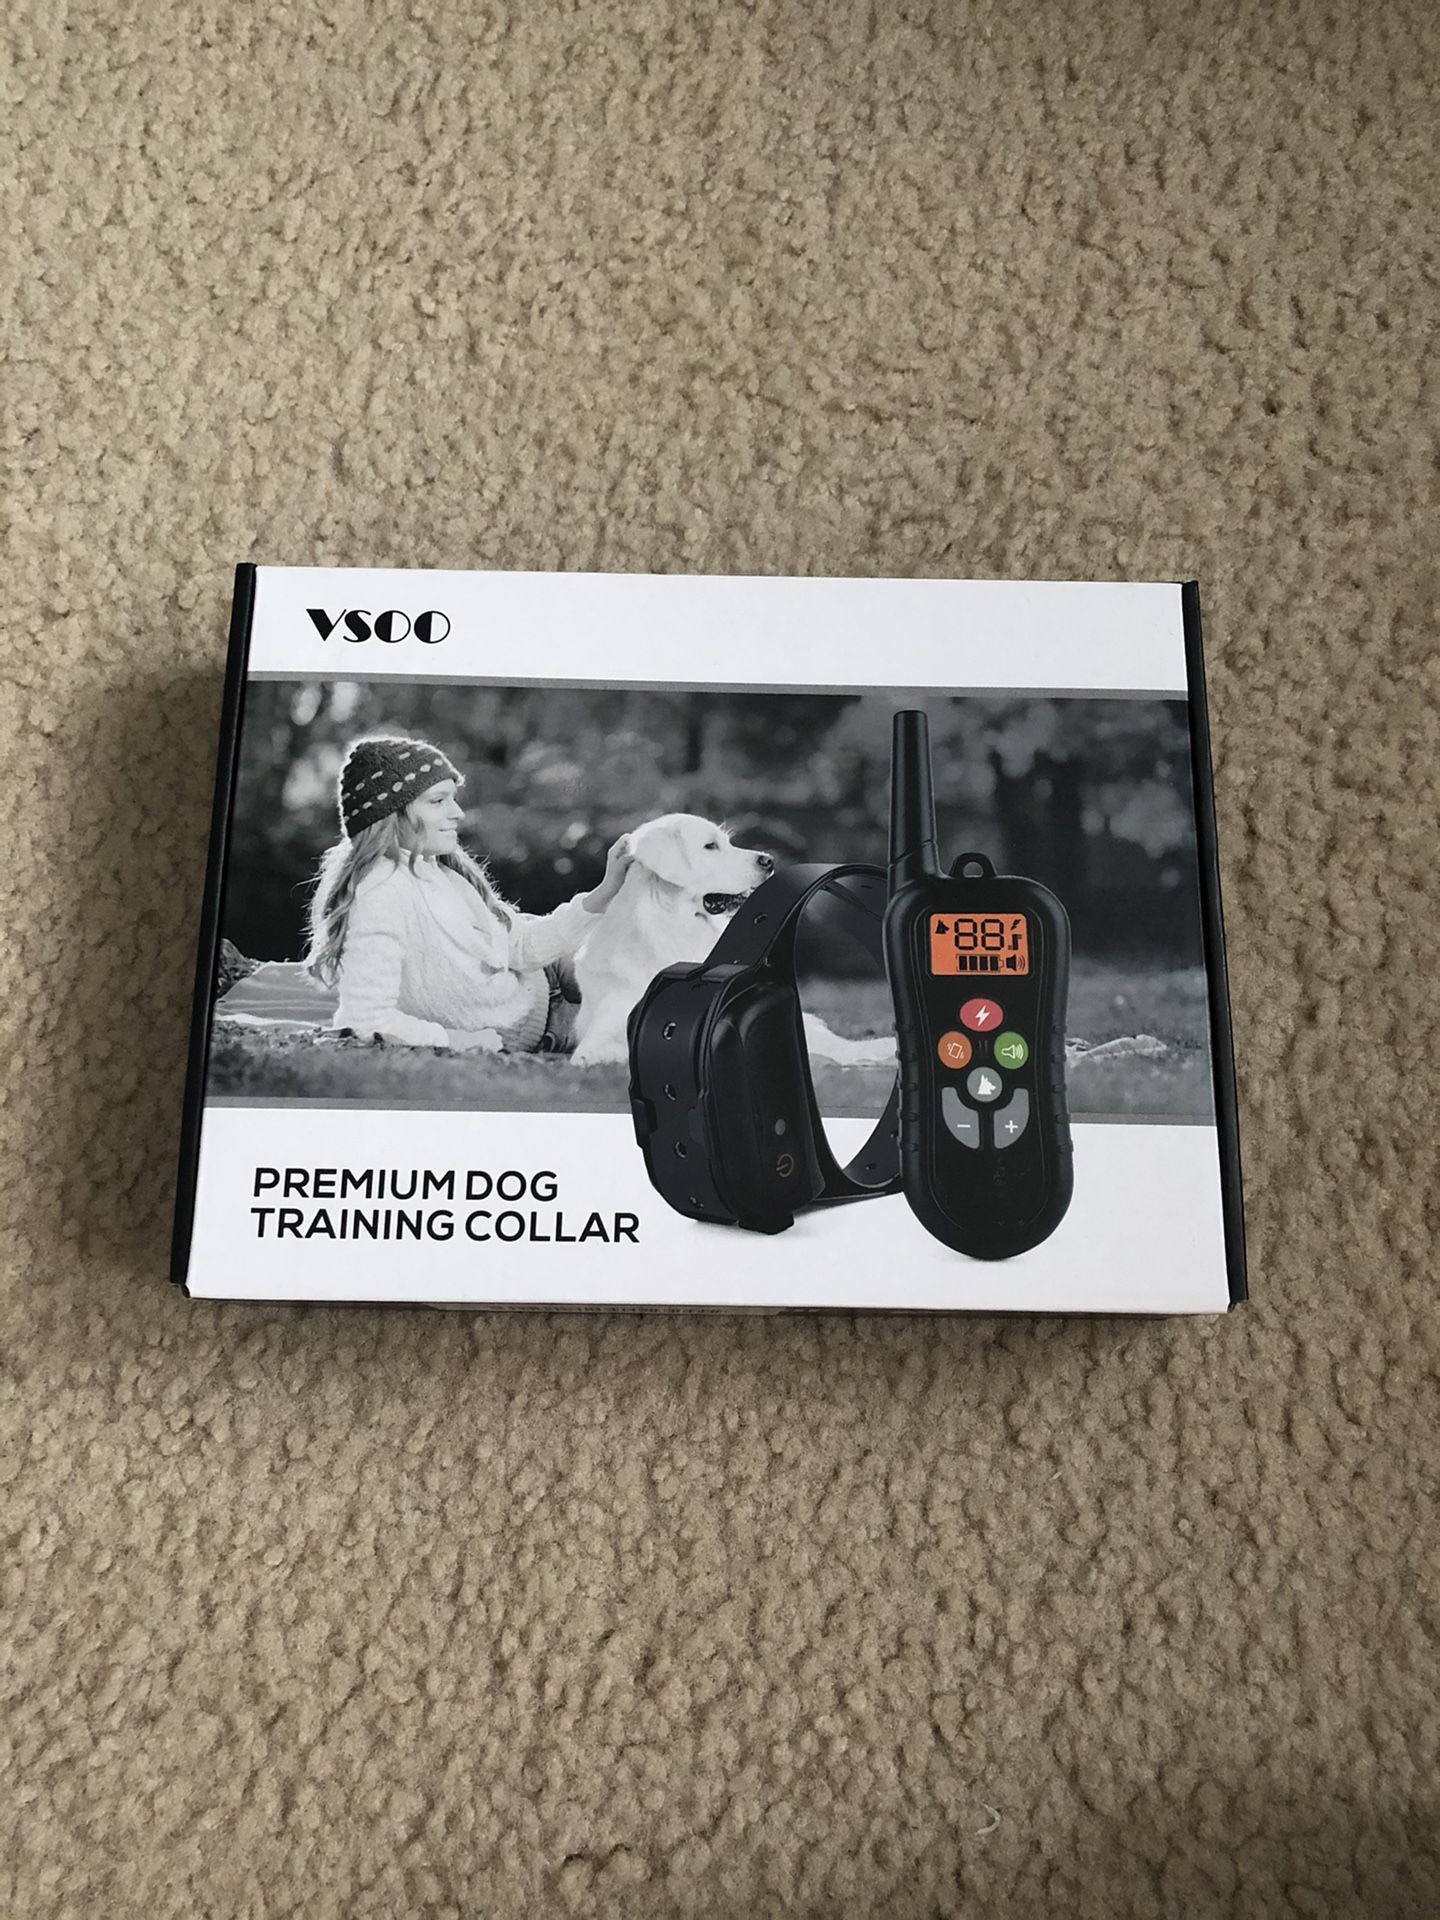 Training collar for dogs